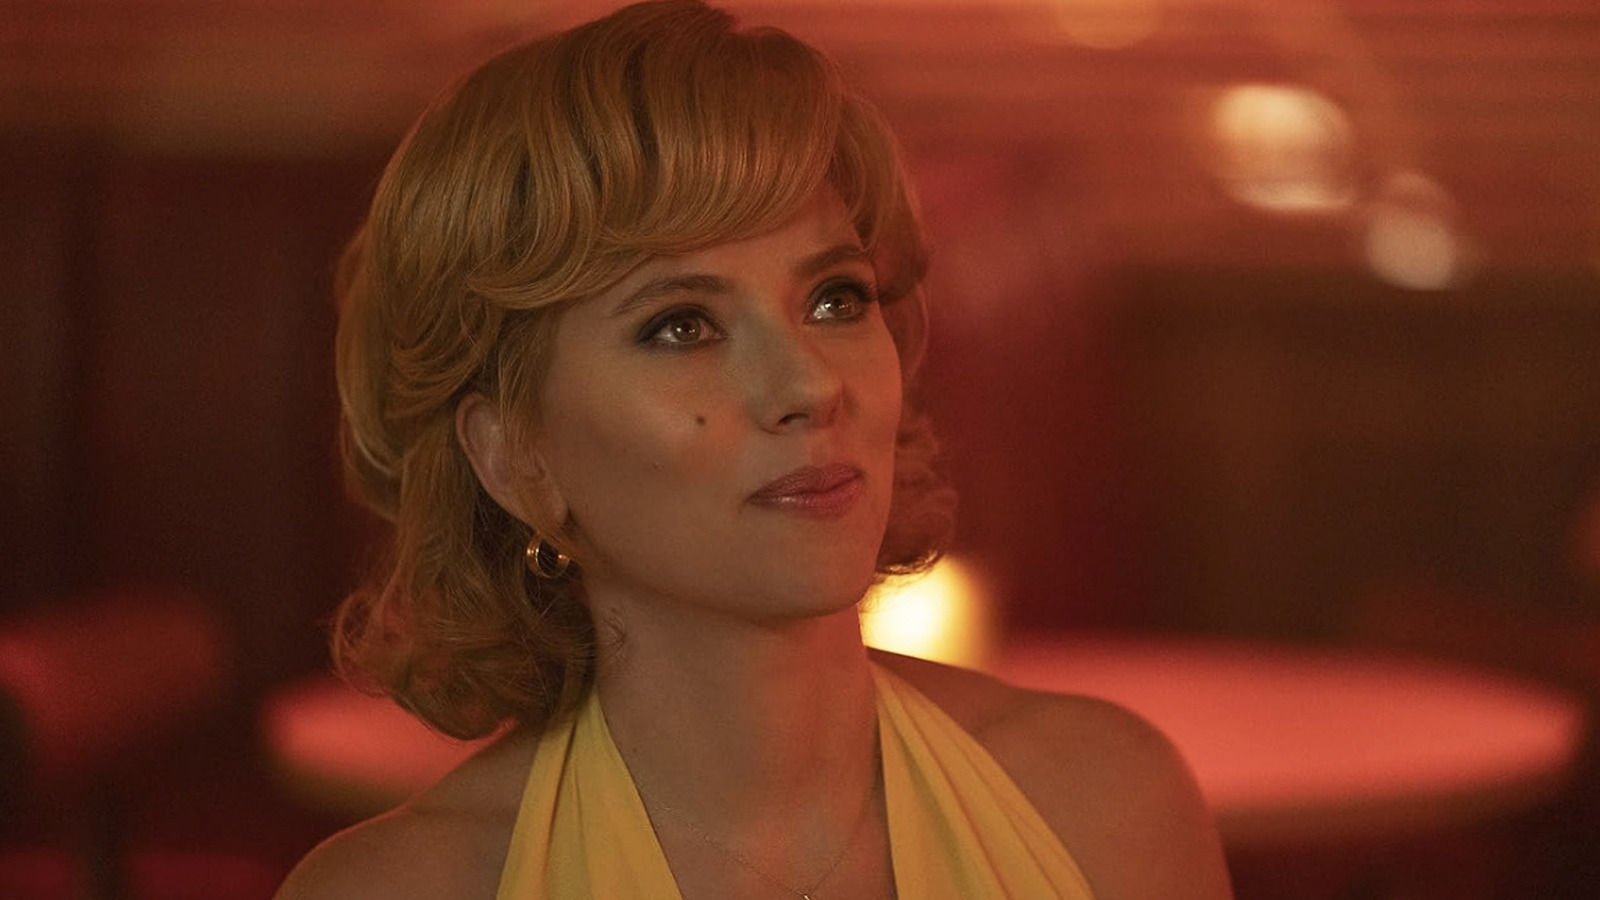 Fly Me To The Moon Offers A Cinematic Rarity: Scarlett Johansson Having Fun